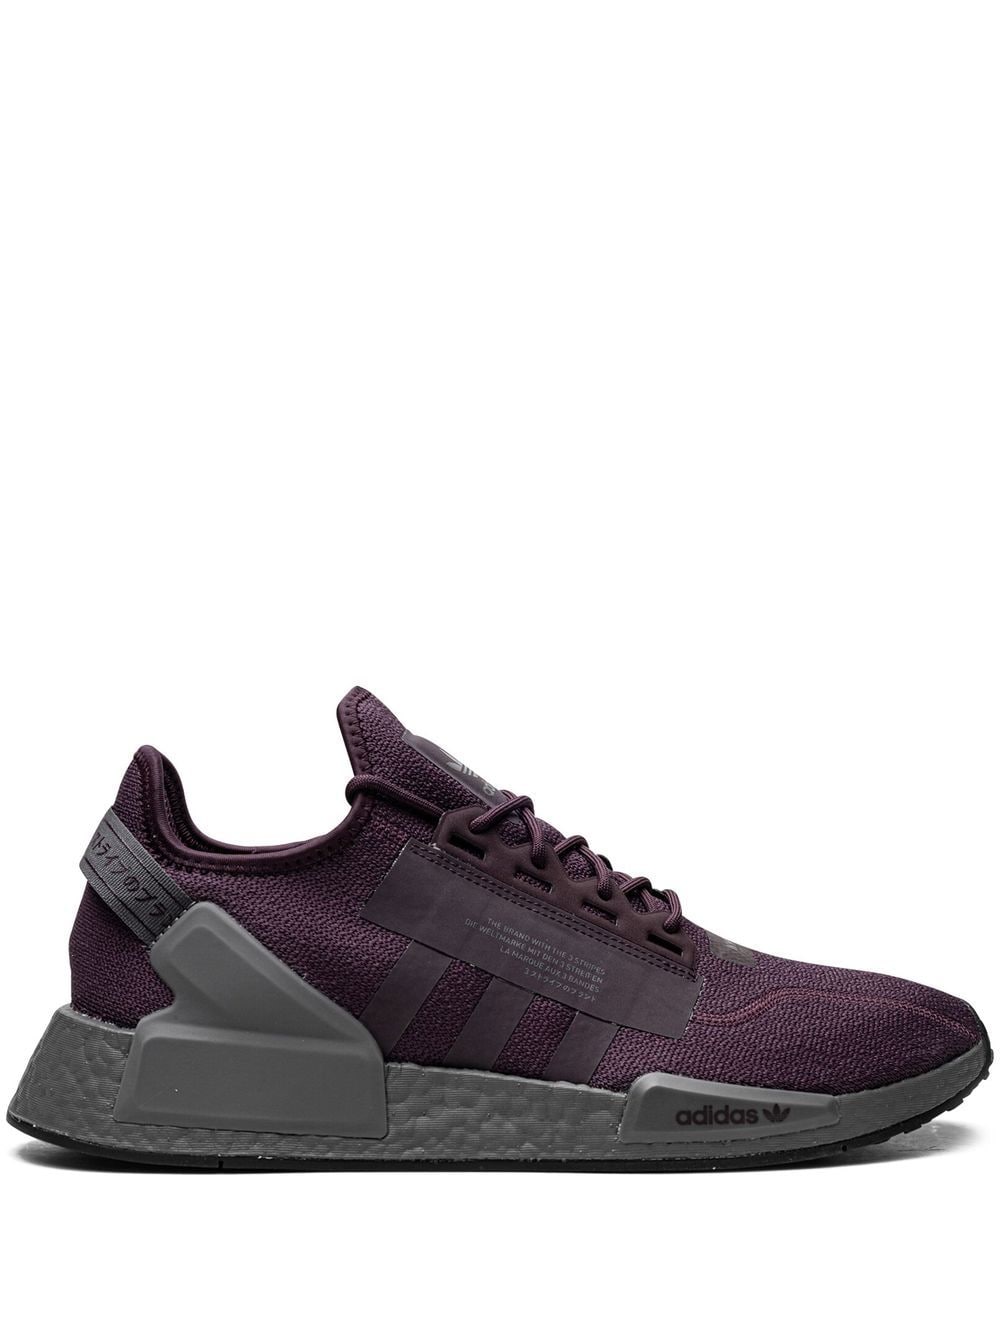 adidas NMD R1 "Shadow Maroon" sneakers - Red von adidas